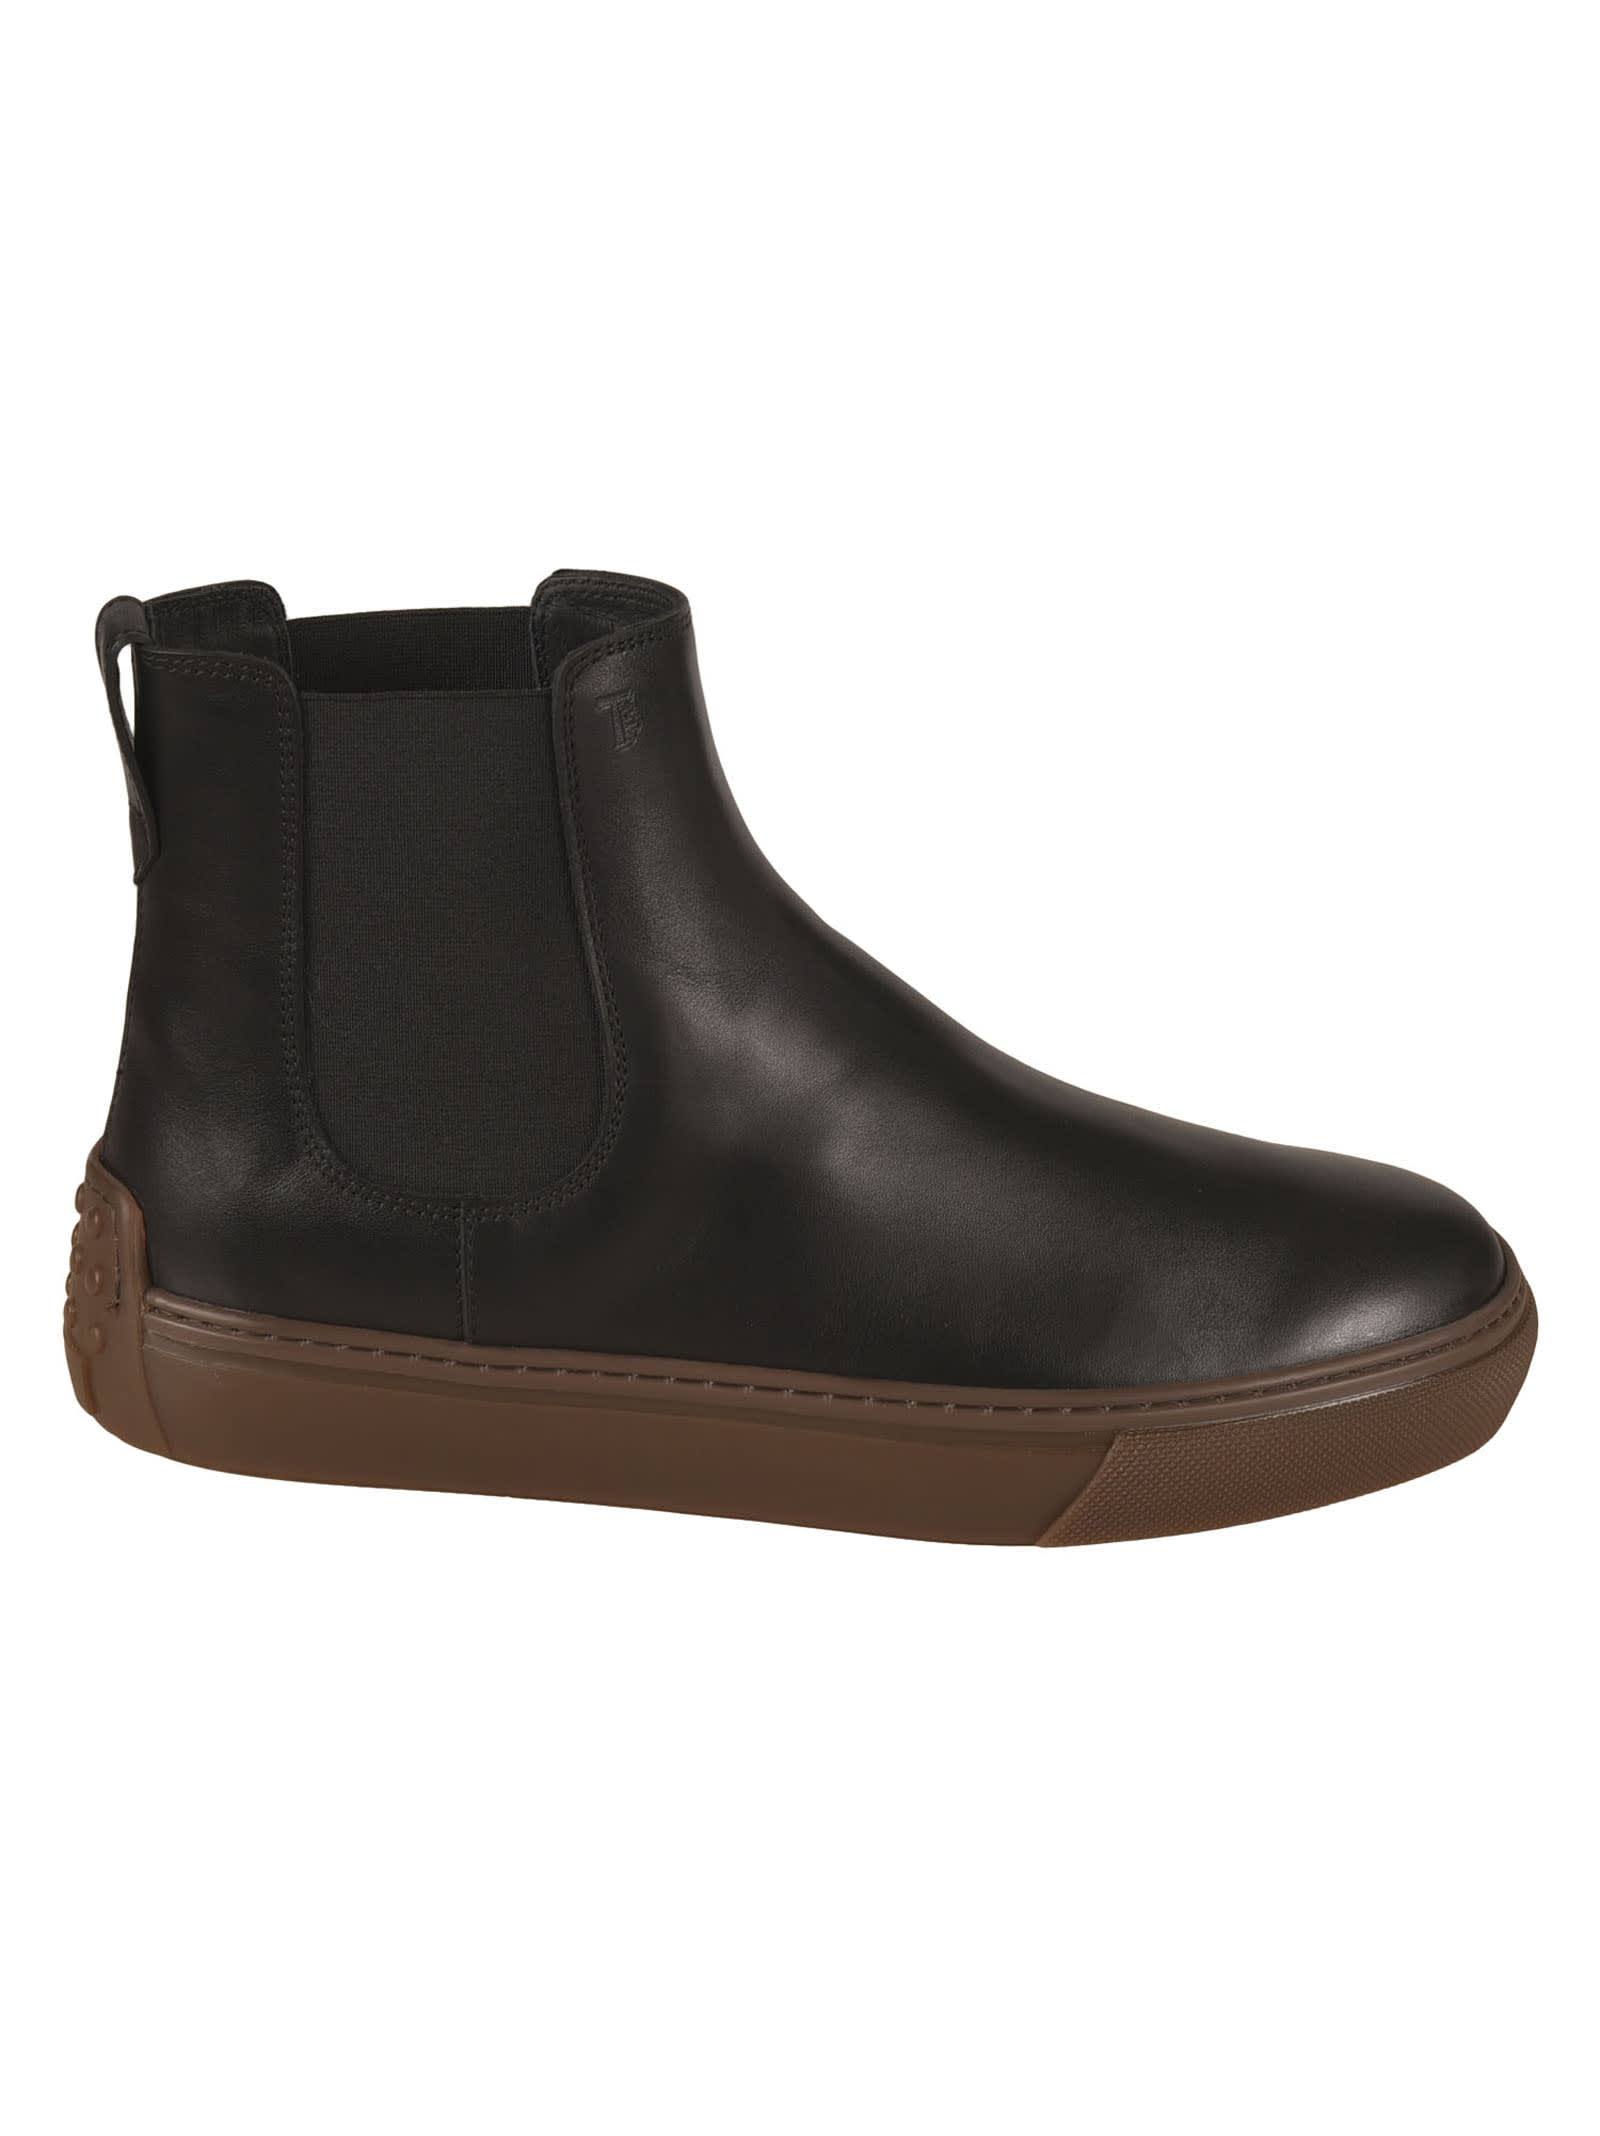 Tods Elastic Sided Flat Chelsea Boots